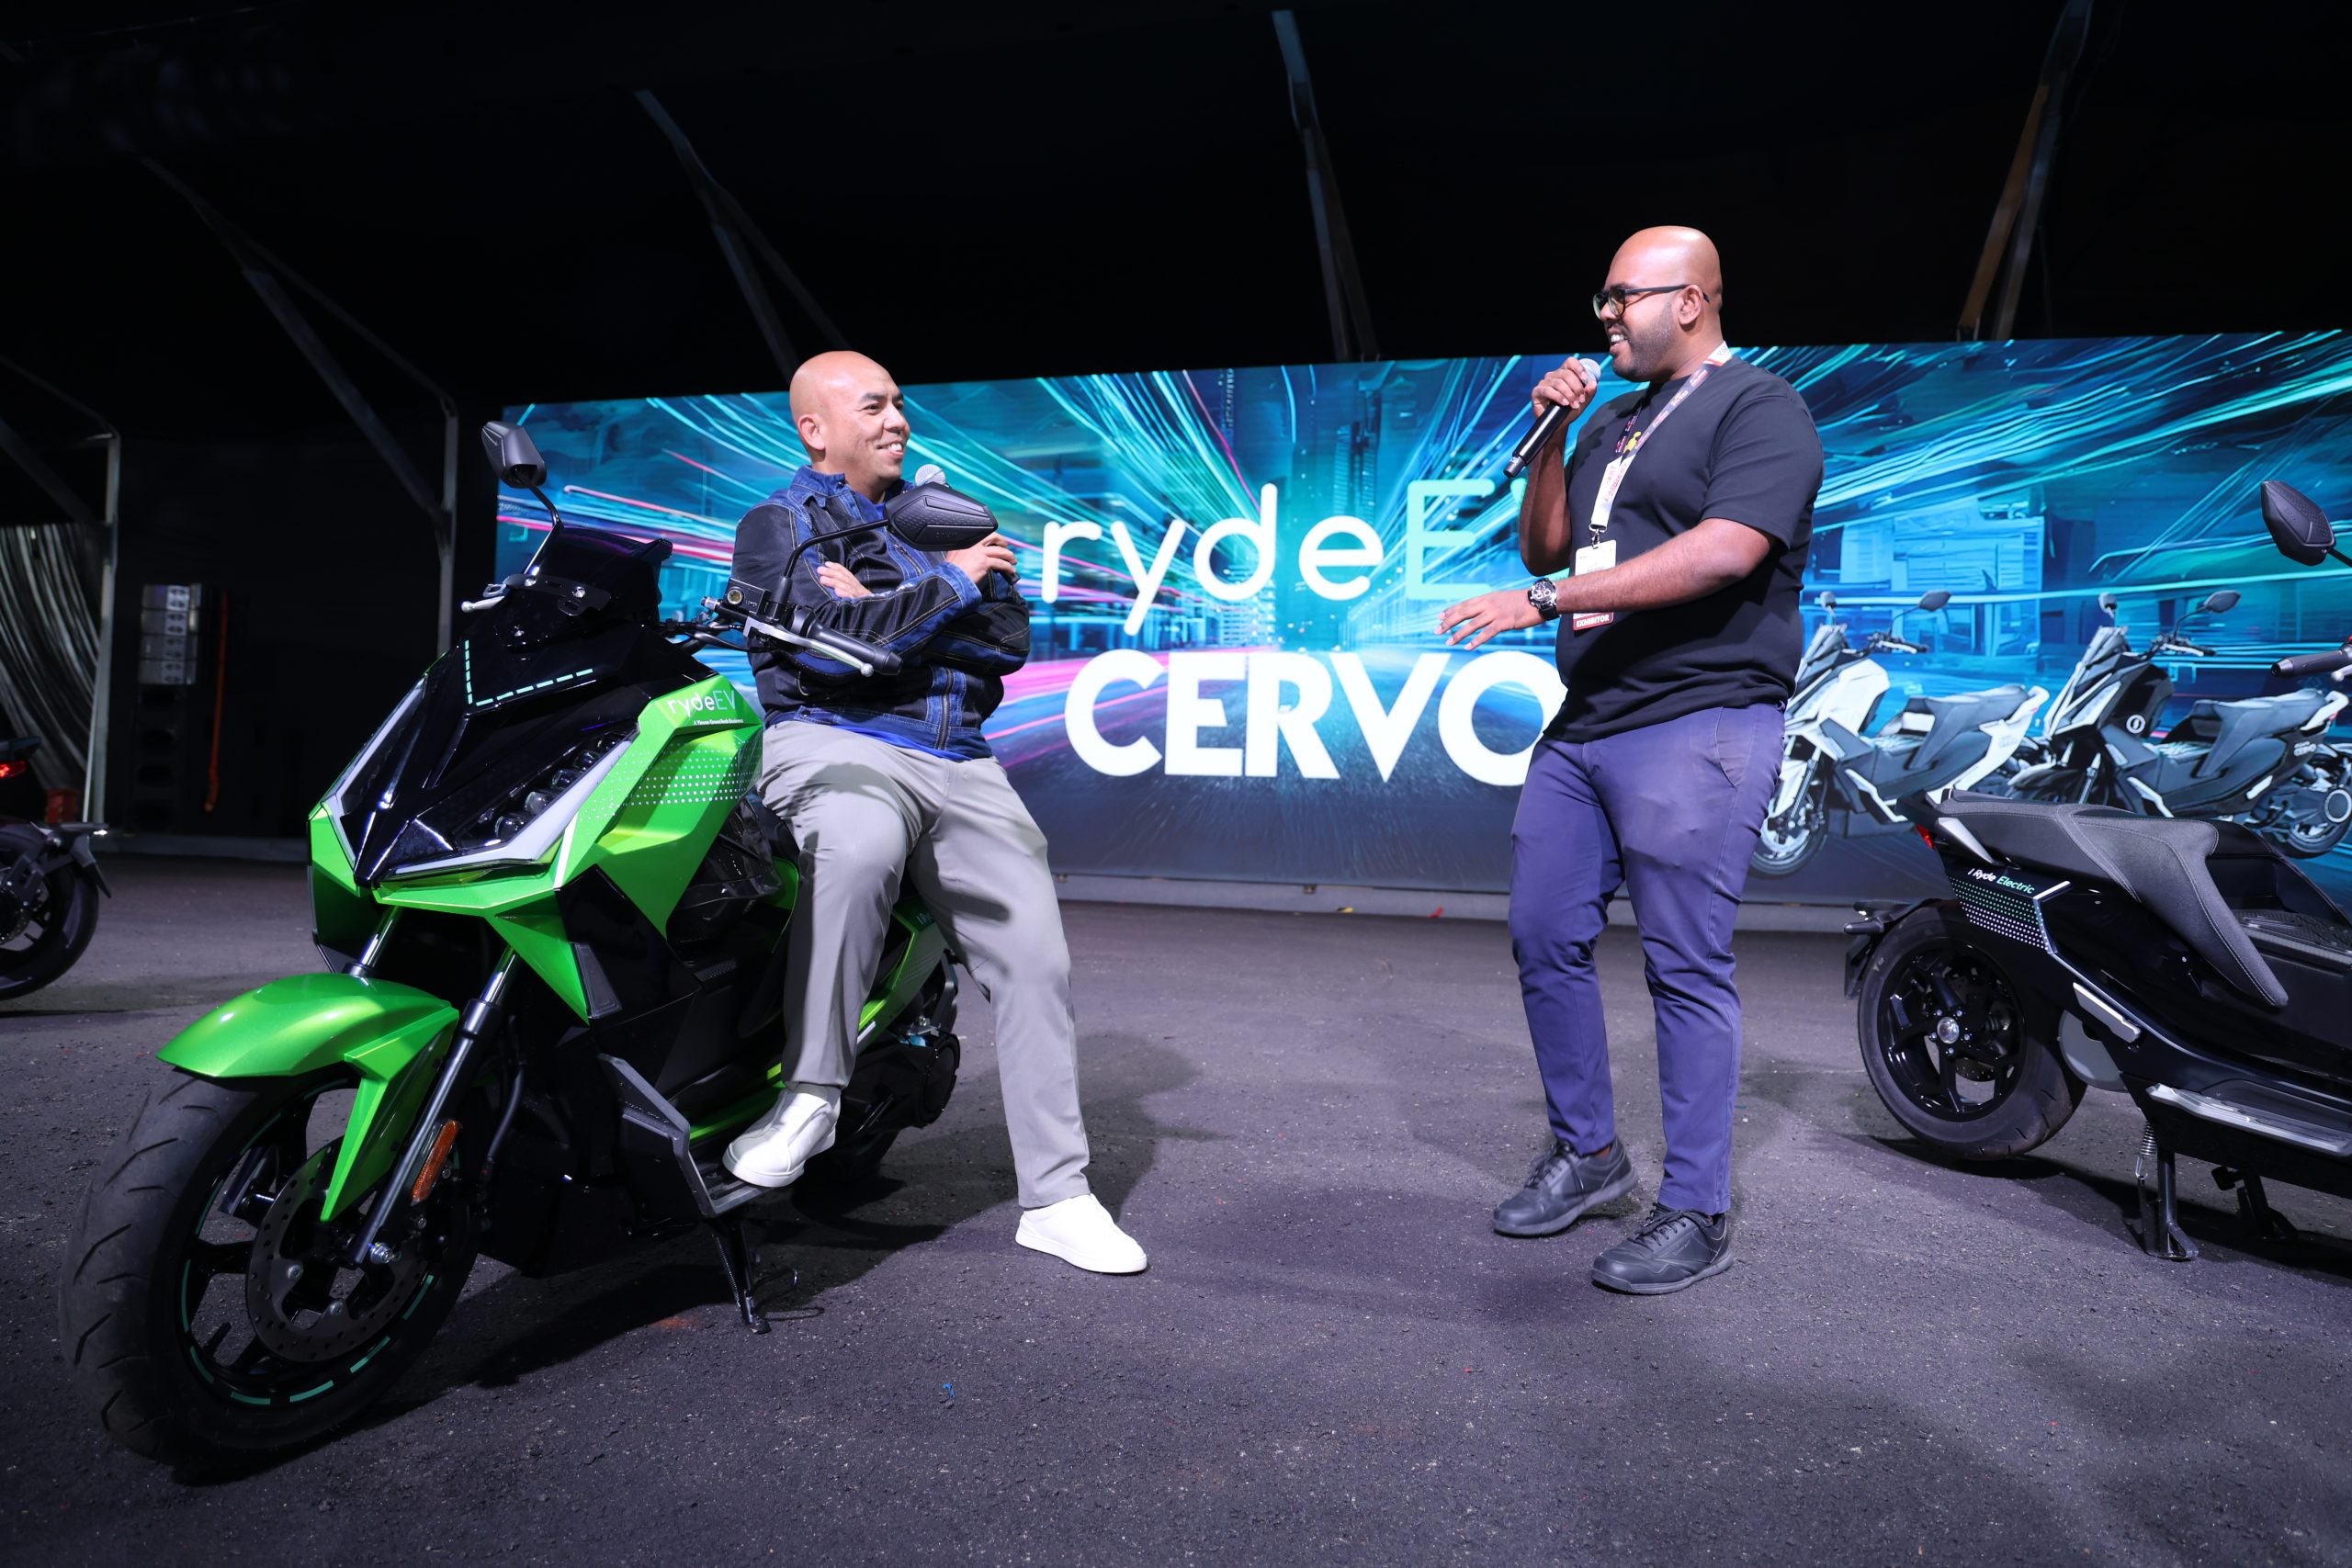 rydeEV expands micromobility solutions with rechargeable CERVO e-bike